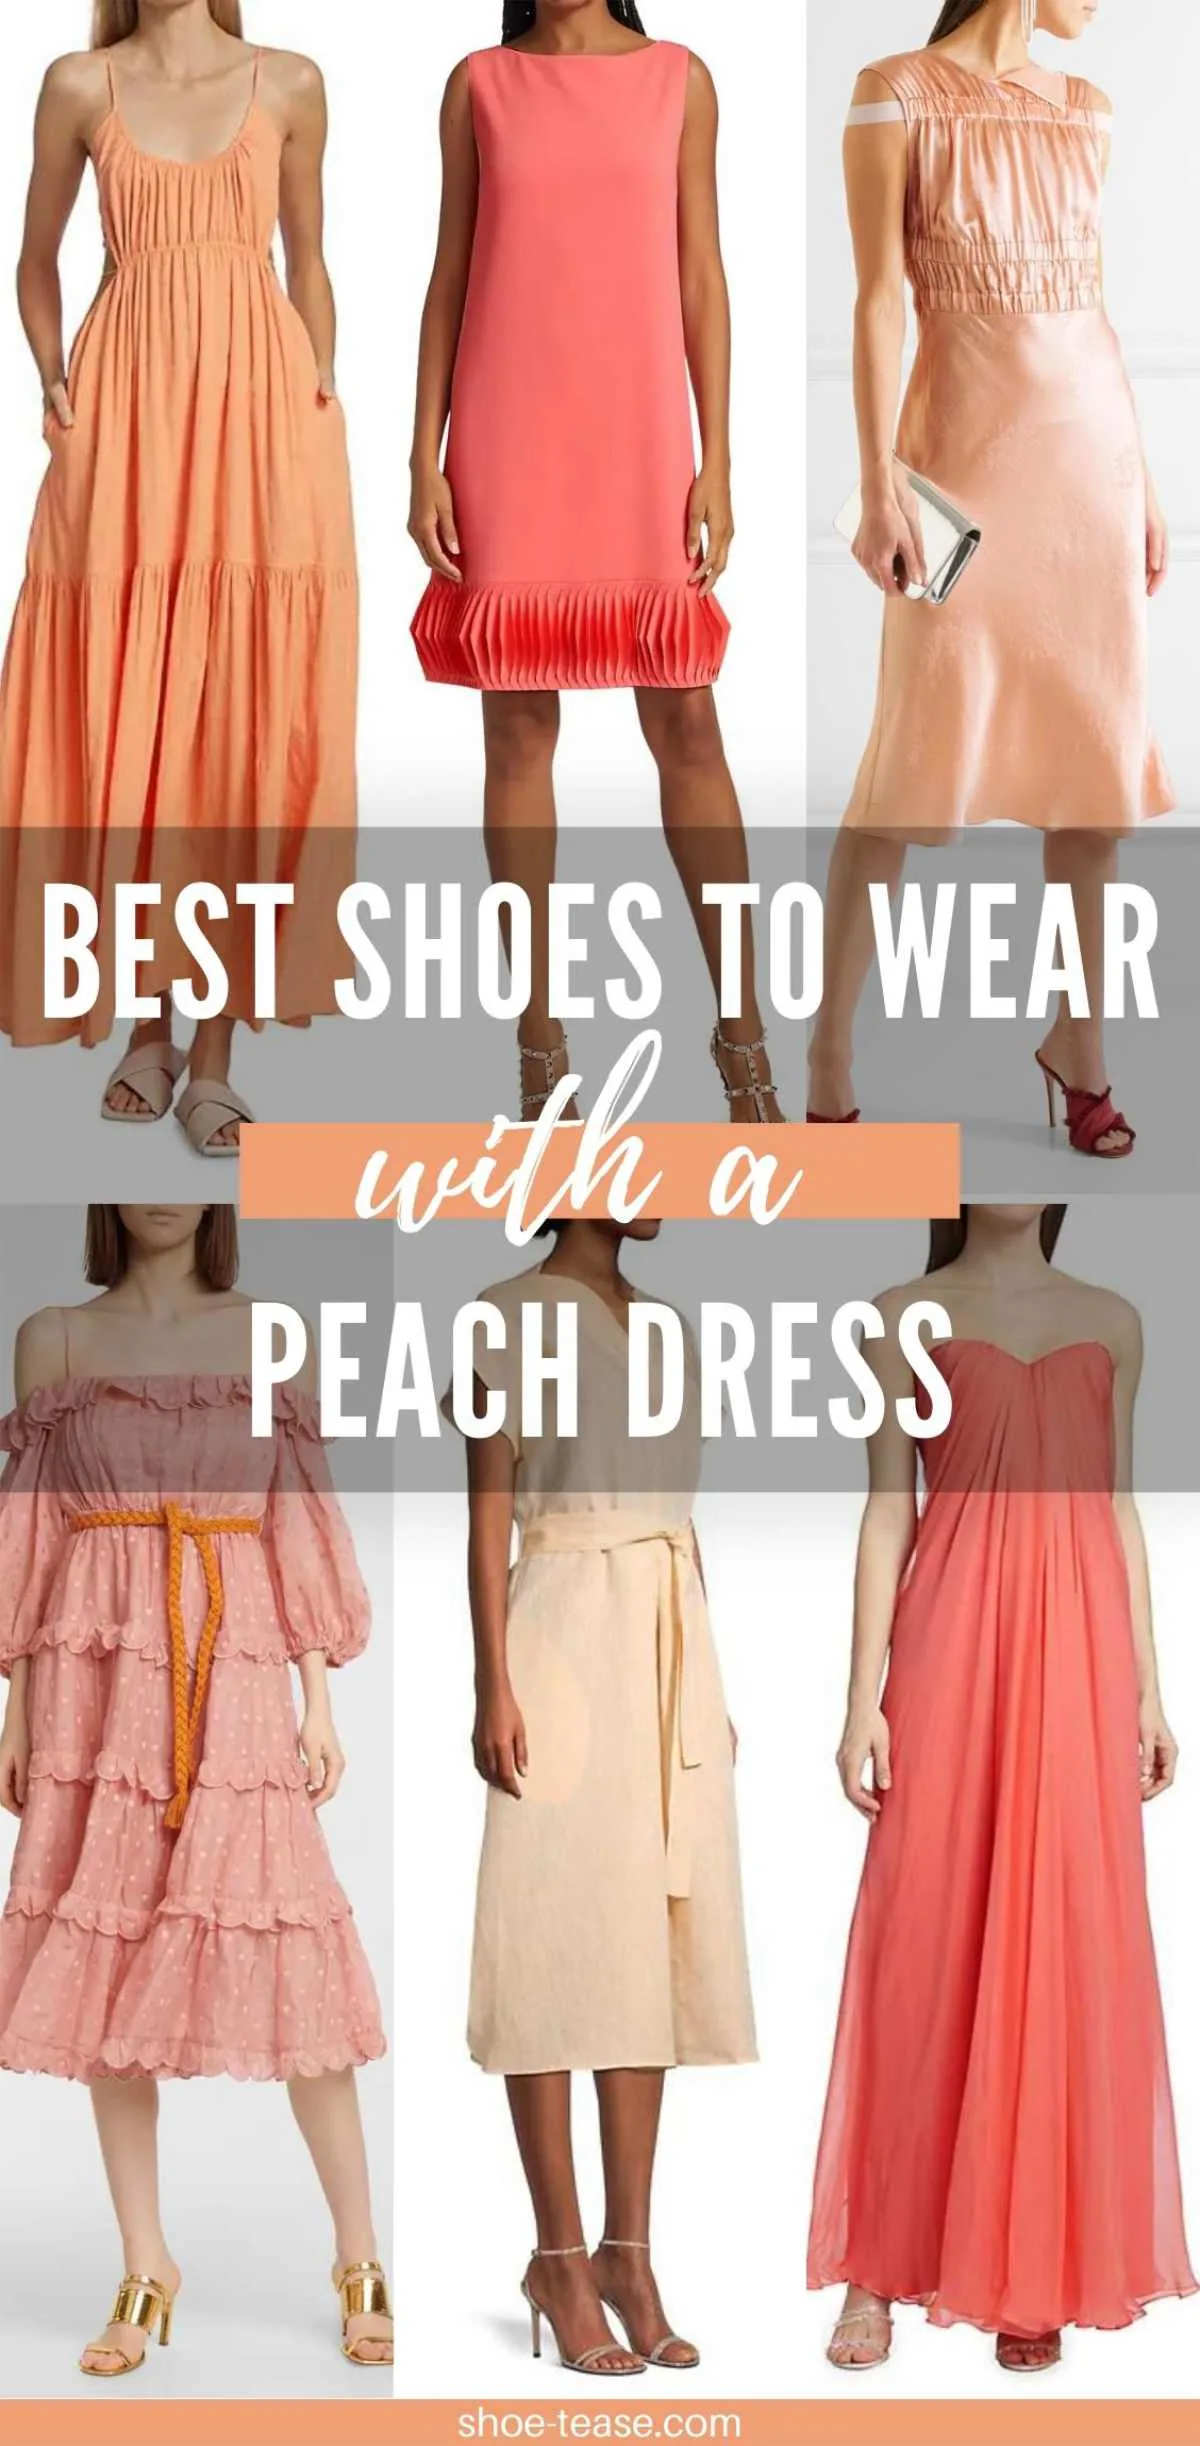 What Color Shoes To Wear With Apricot Dress – PesoGuide